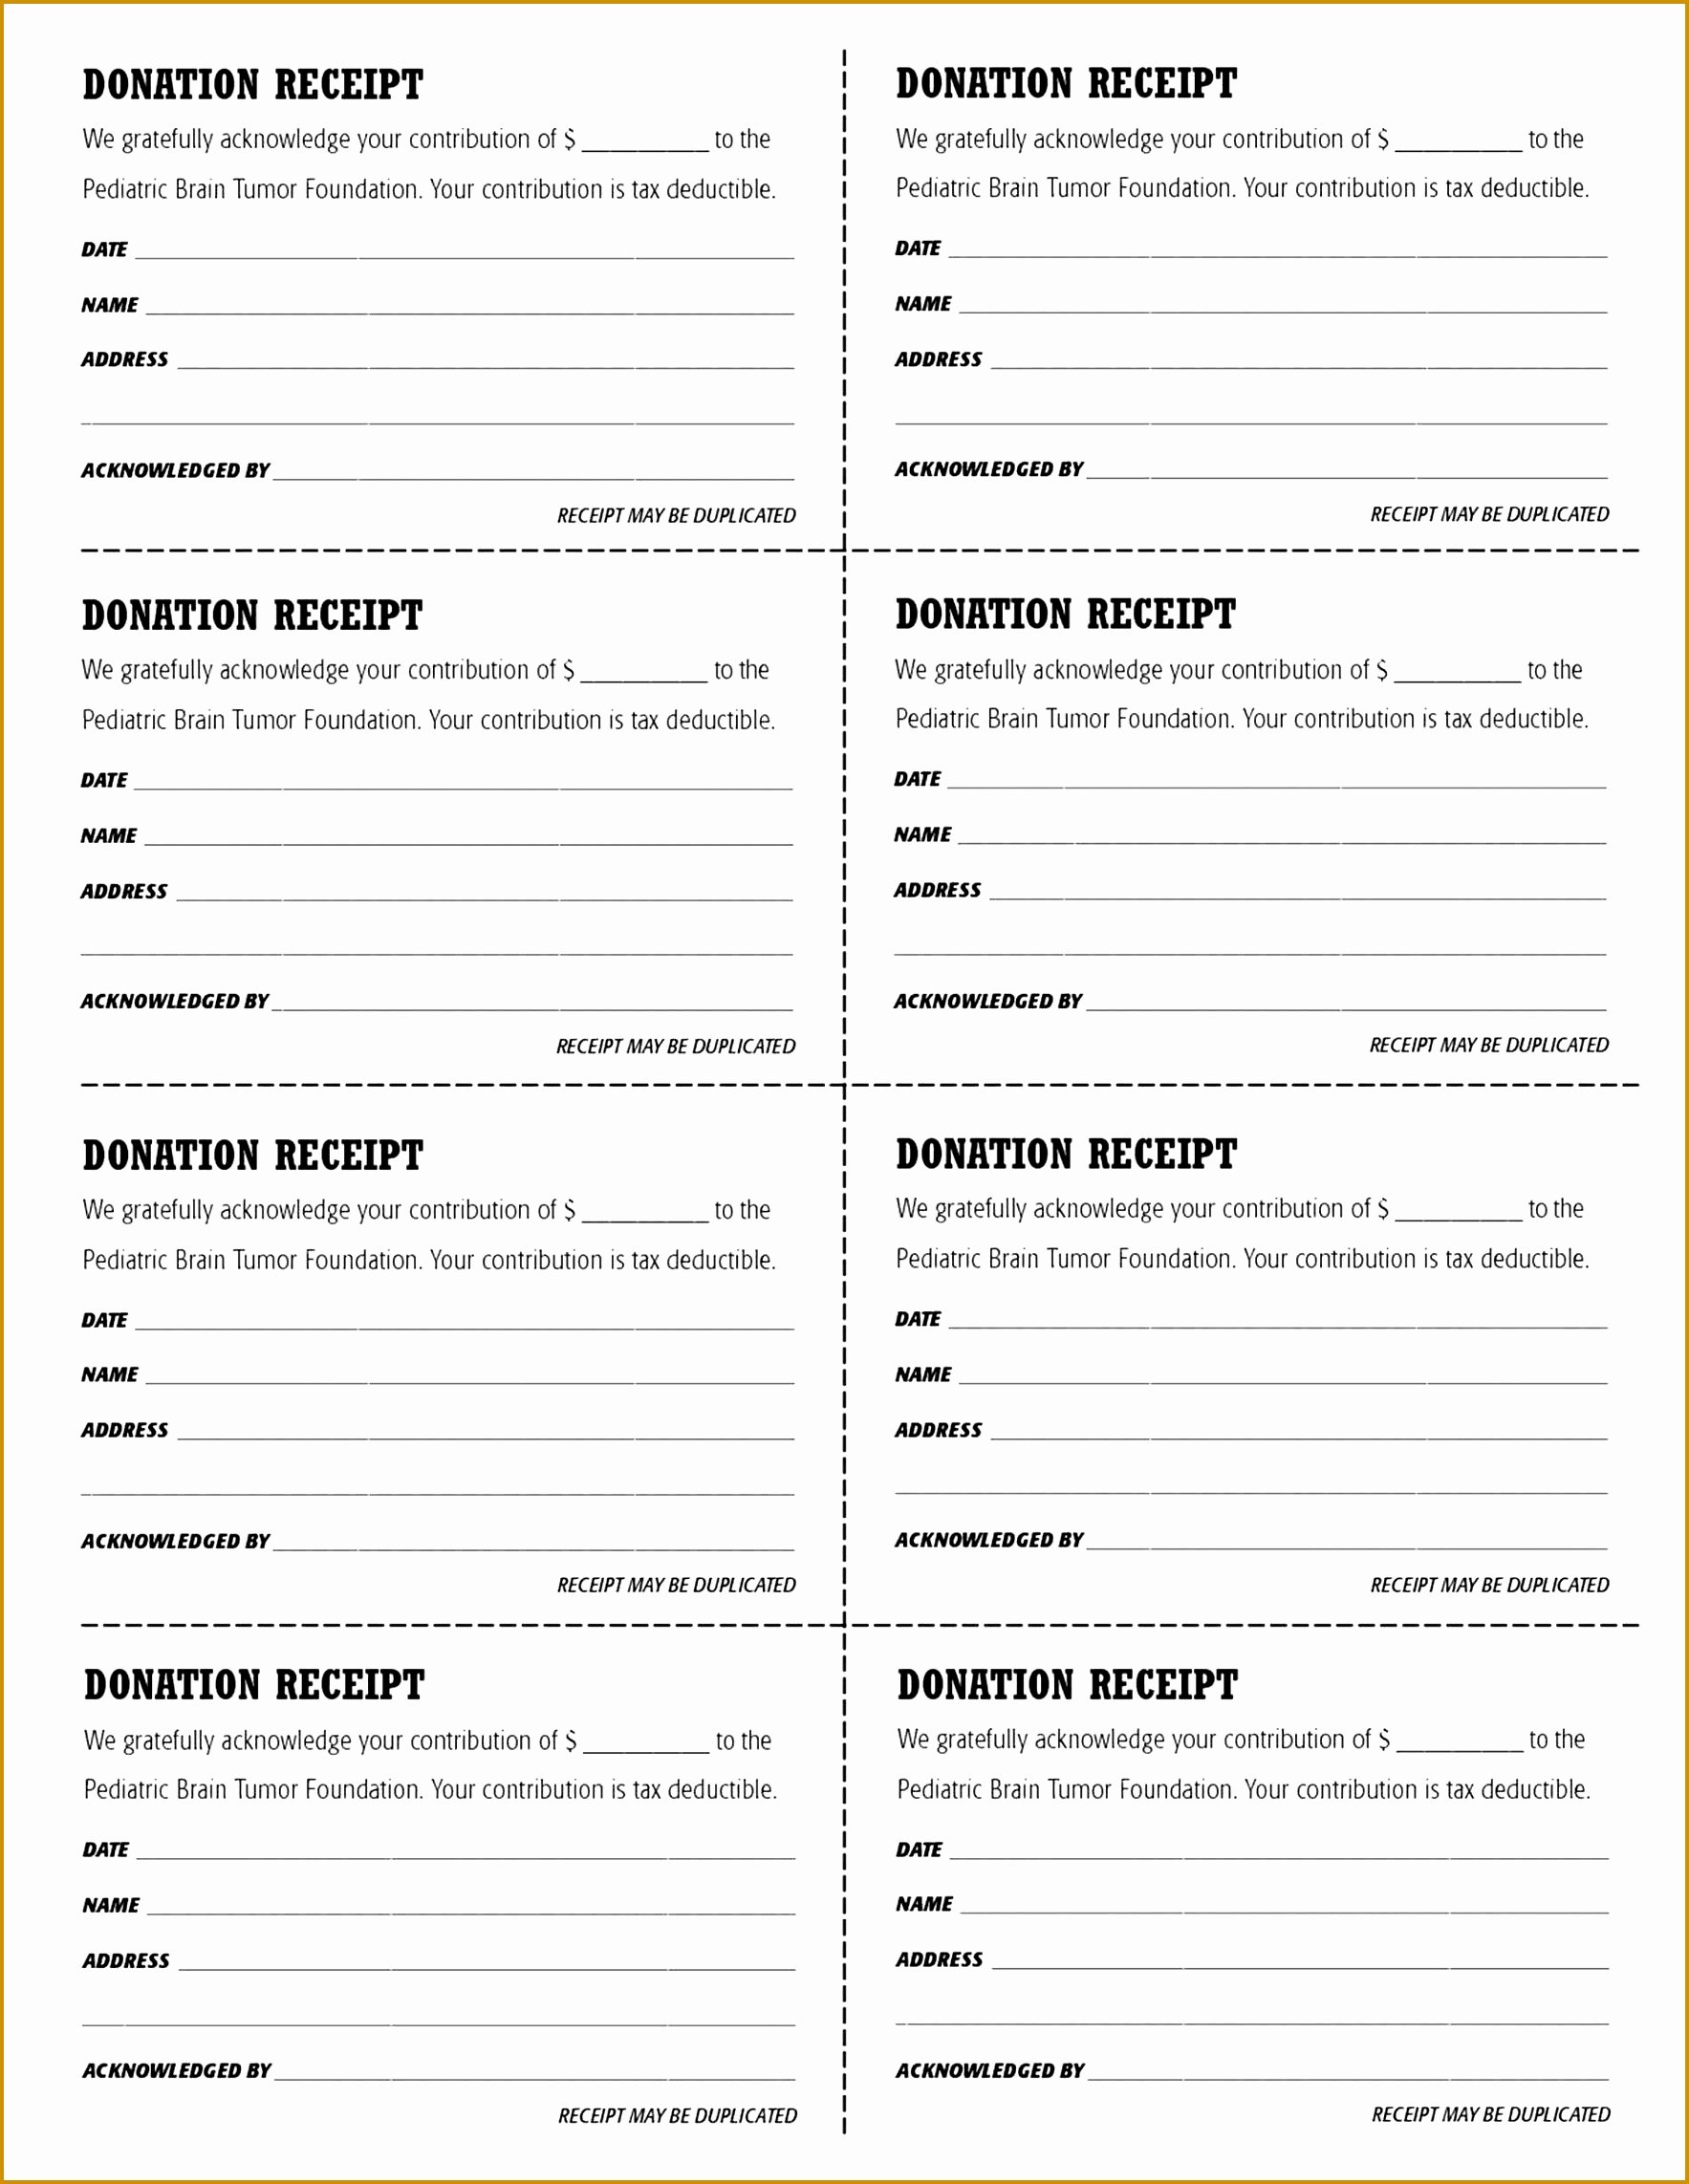 Tax Deductible Donation Receipt Template New 6 Tax Deductible Receipt Template